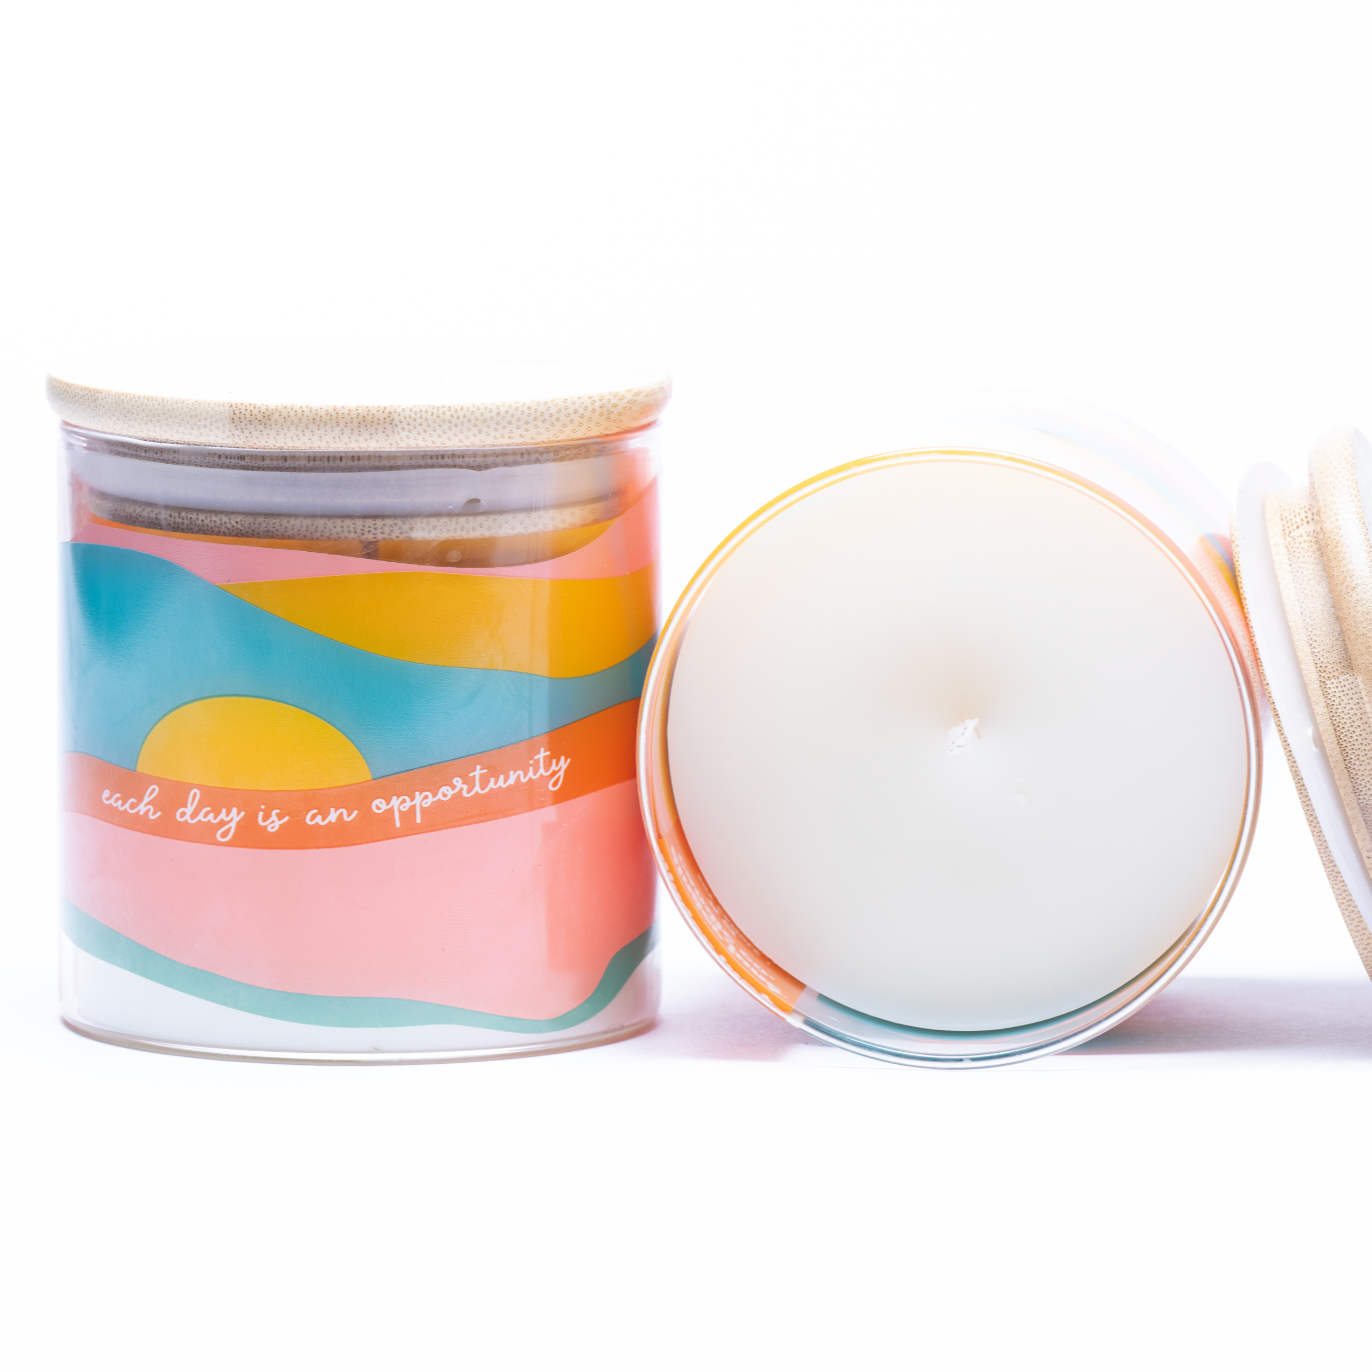 Each Day is an Opportunity 100% Soy Wax & Essential Oil Candle